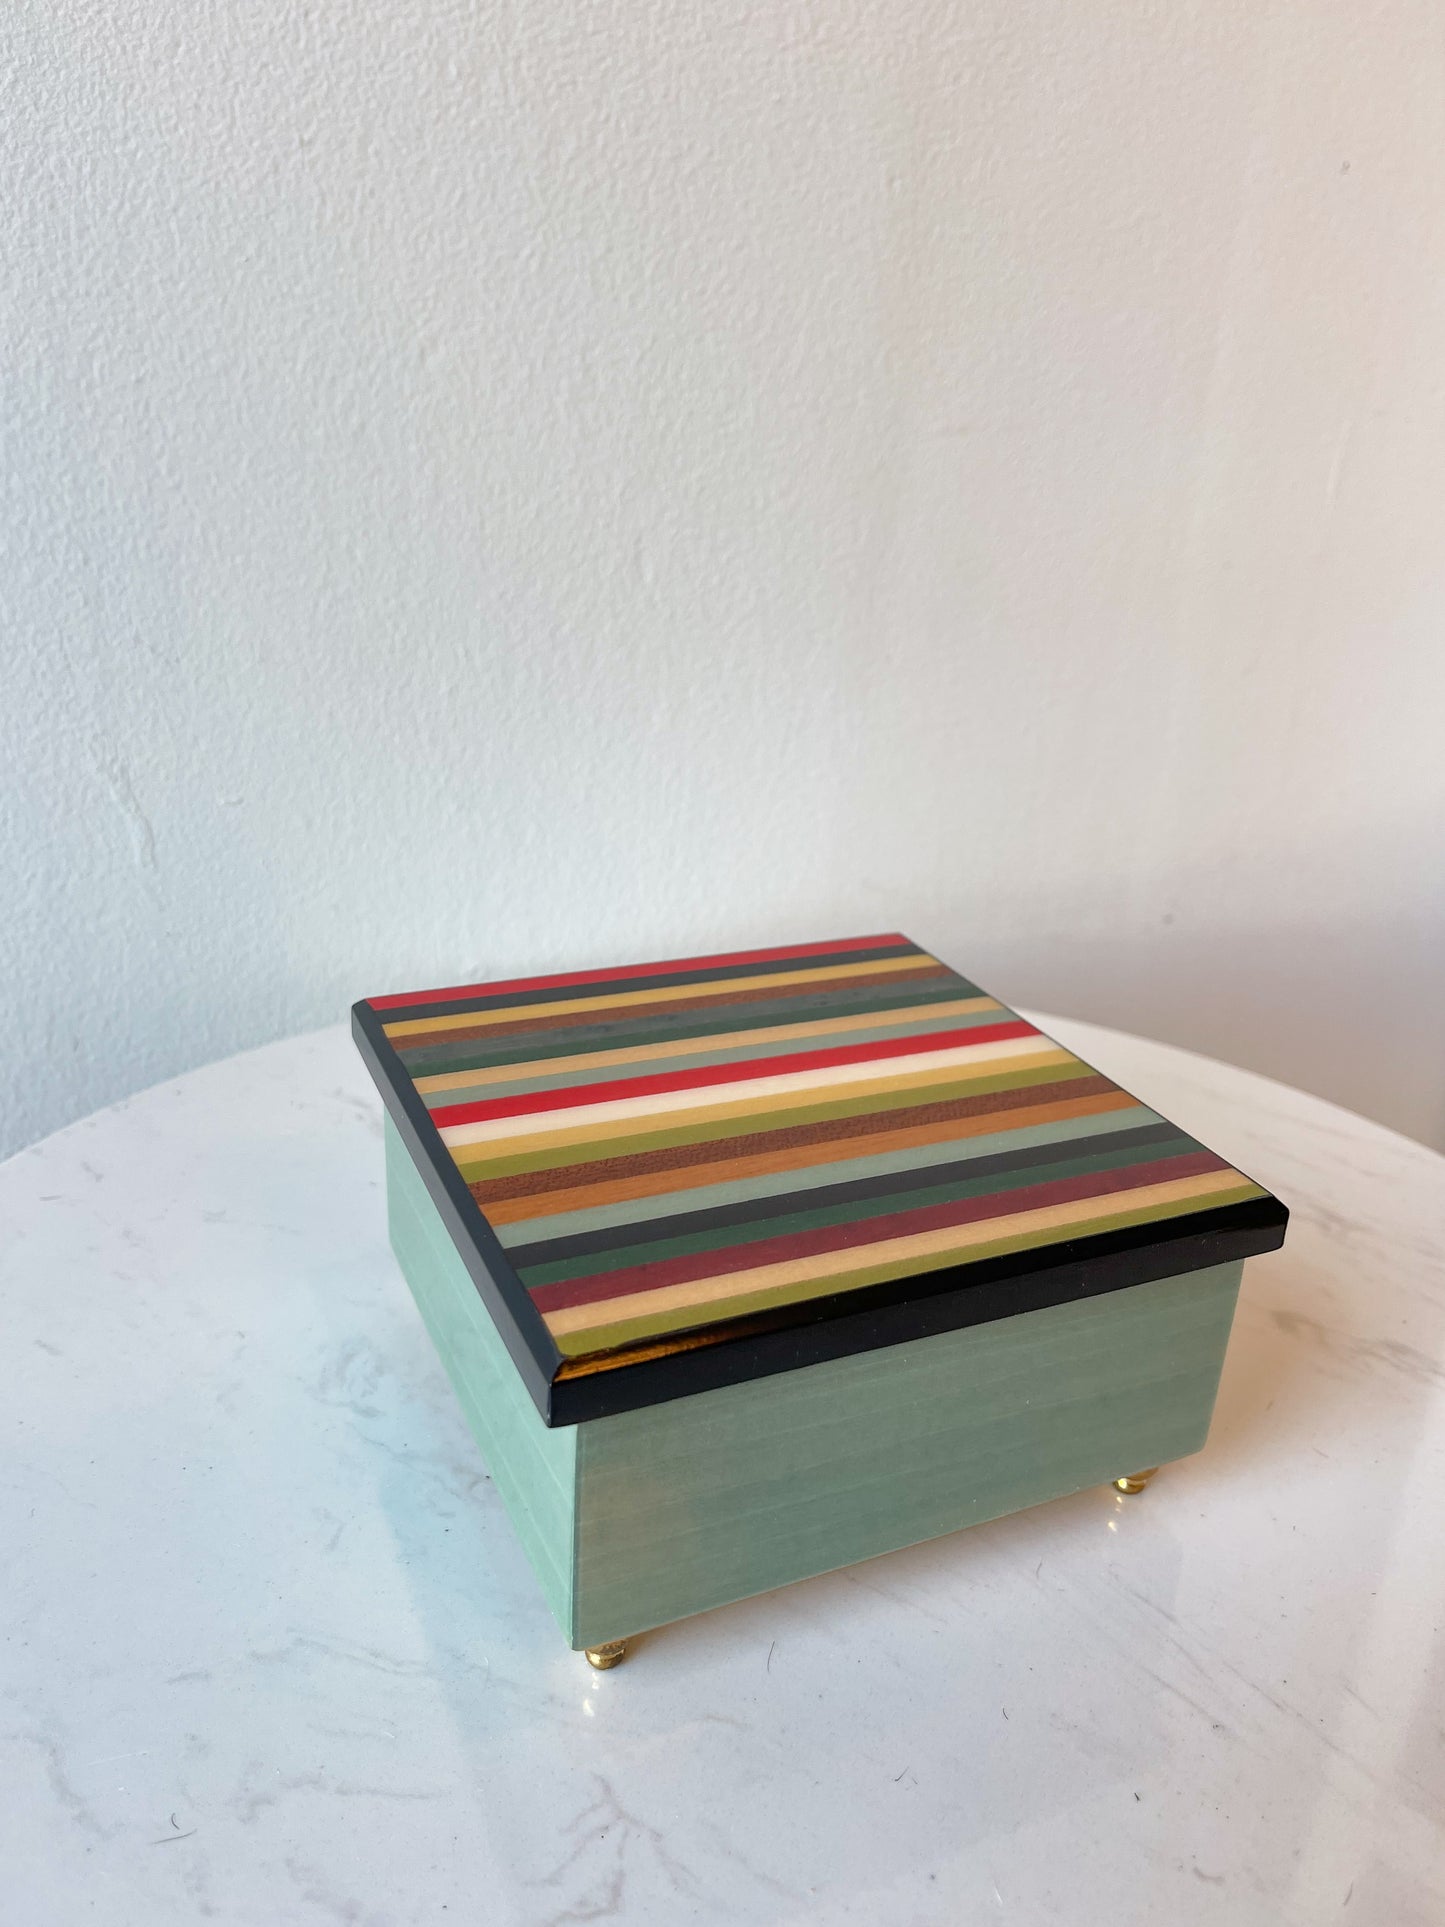 Stripe Wooden Inlaid Music Box - Made in Sorrento, Italy